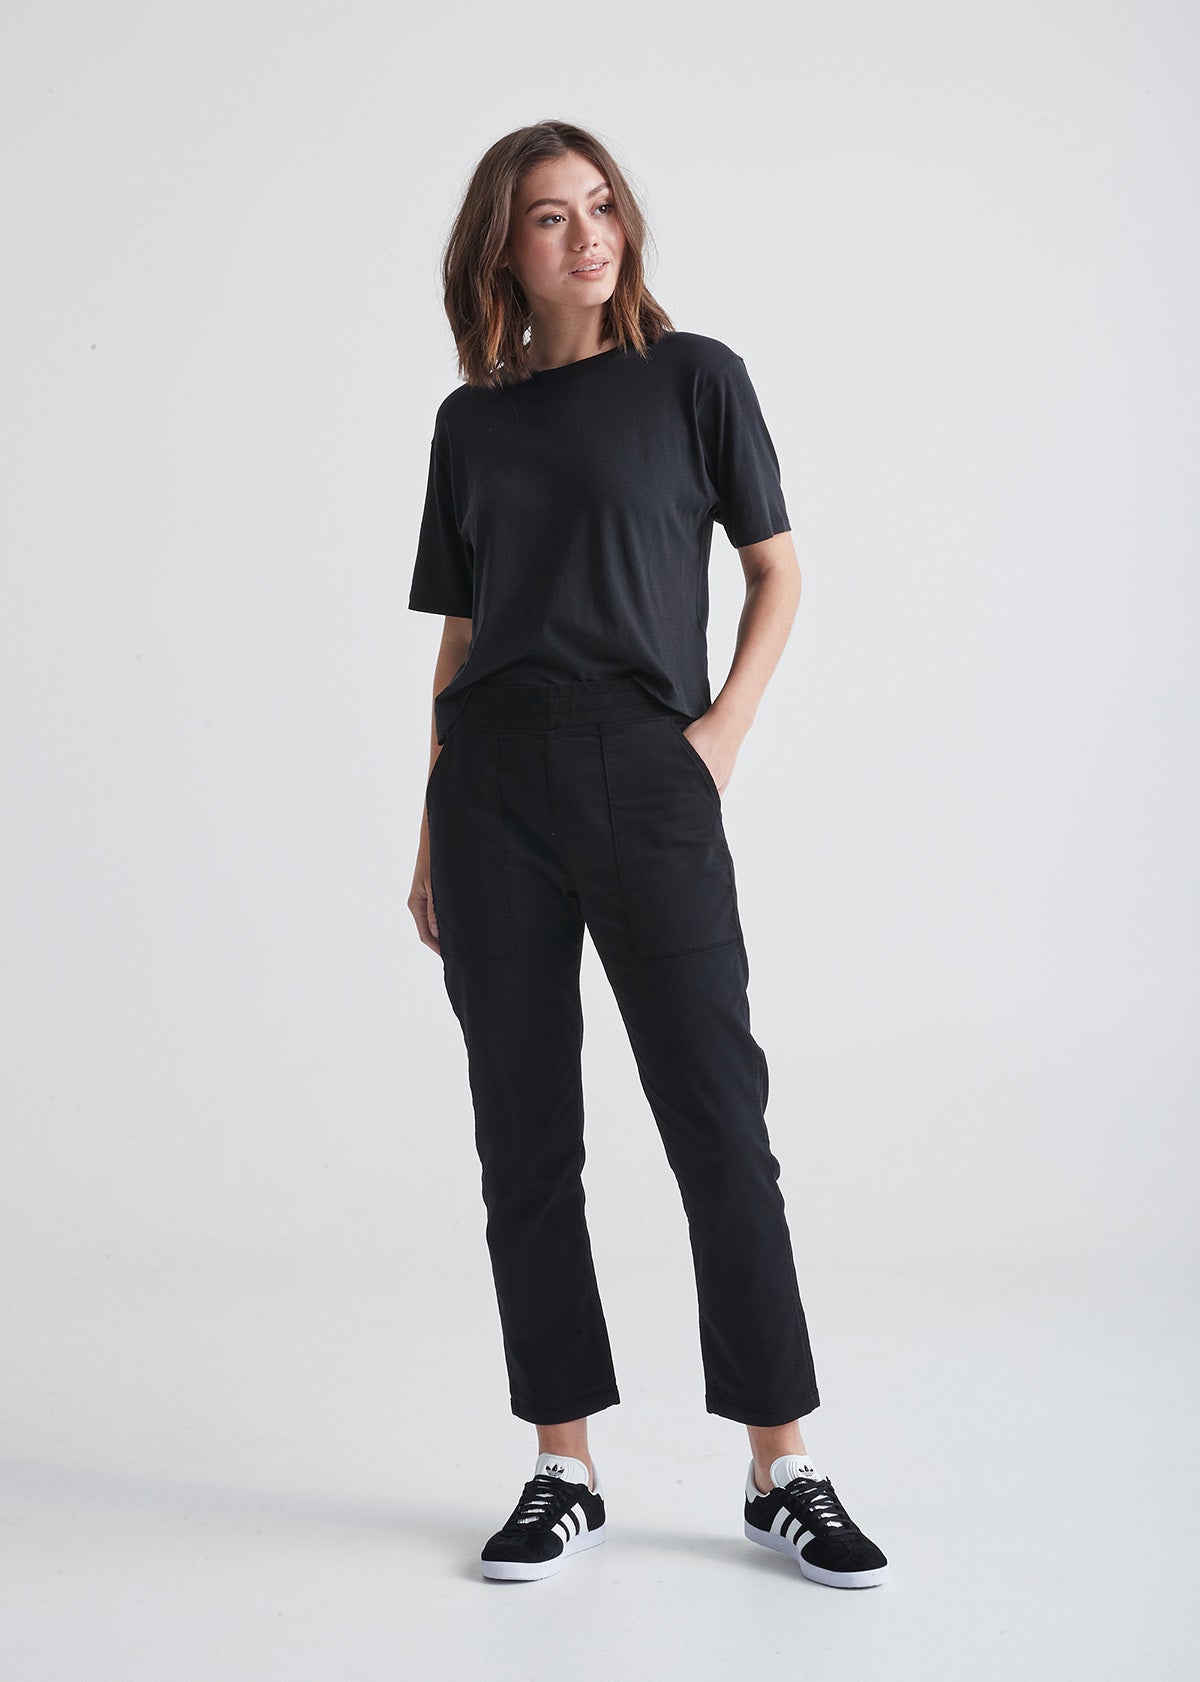 Black sweat pants by Adamo in plus sizes up to 14XL